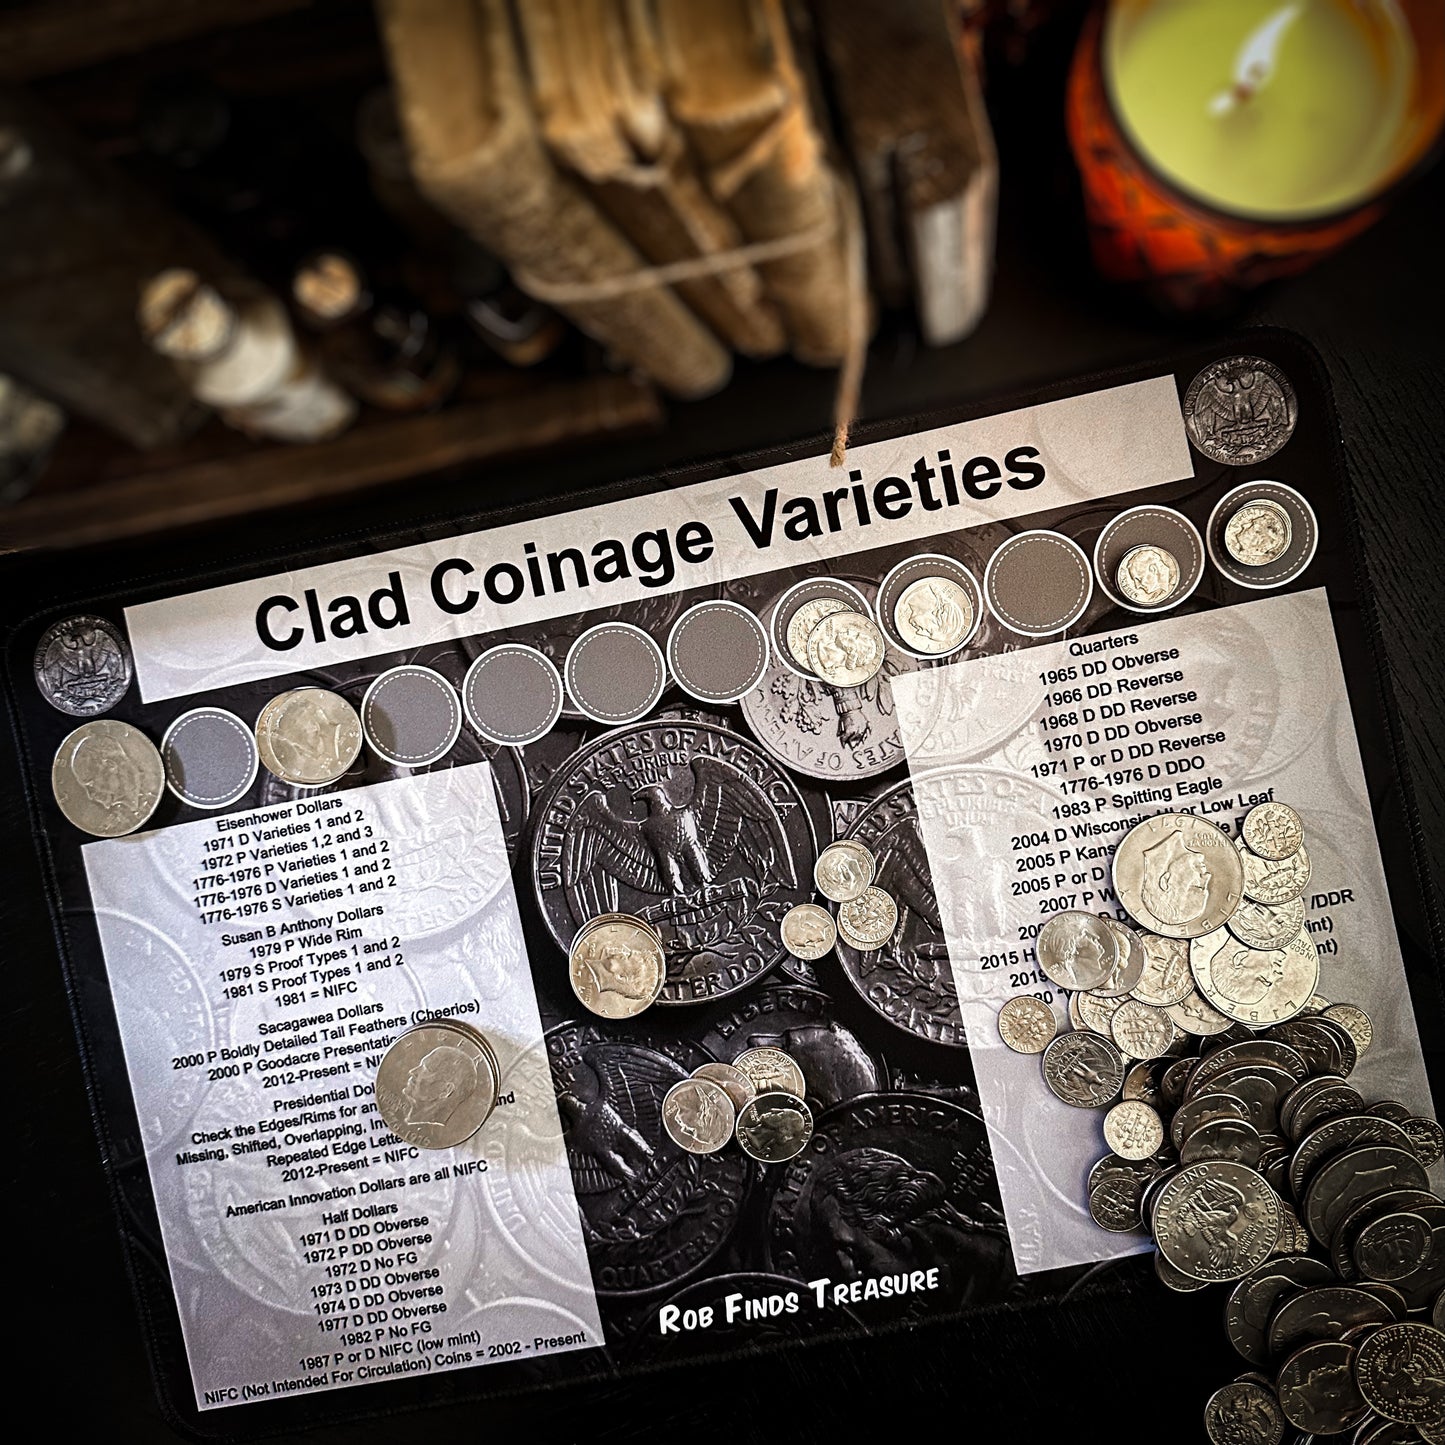 Close up of a layout with coins of a Clad Varieties coin roll hunting mat made by Rob Finds Treasure featuring organized rows for stacking Clad Variety finds, providing a convenient and systematic setup for searching through coins